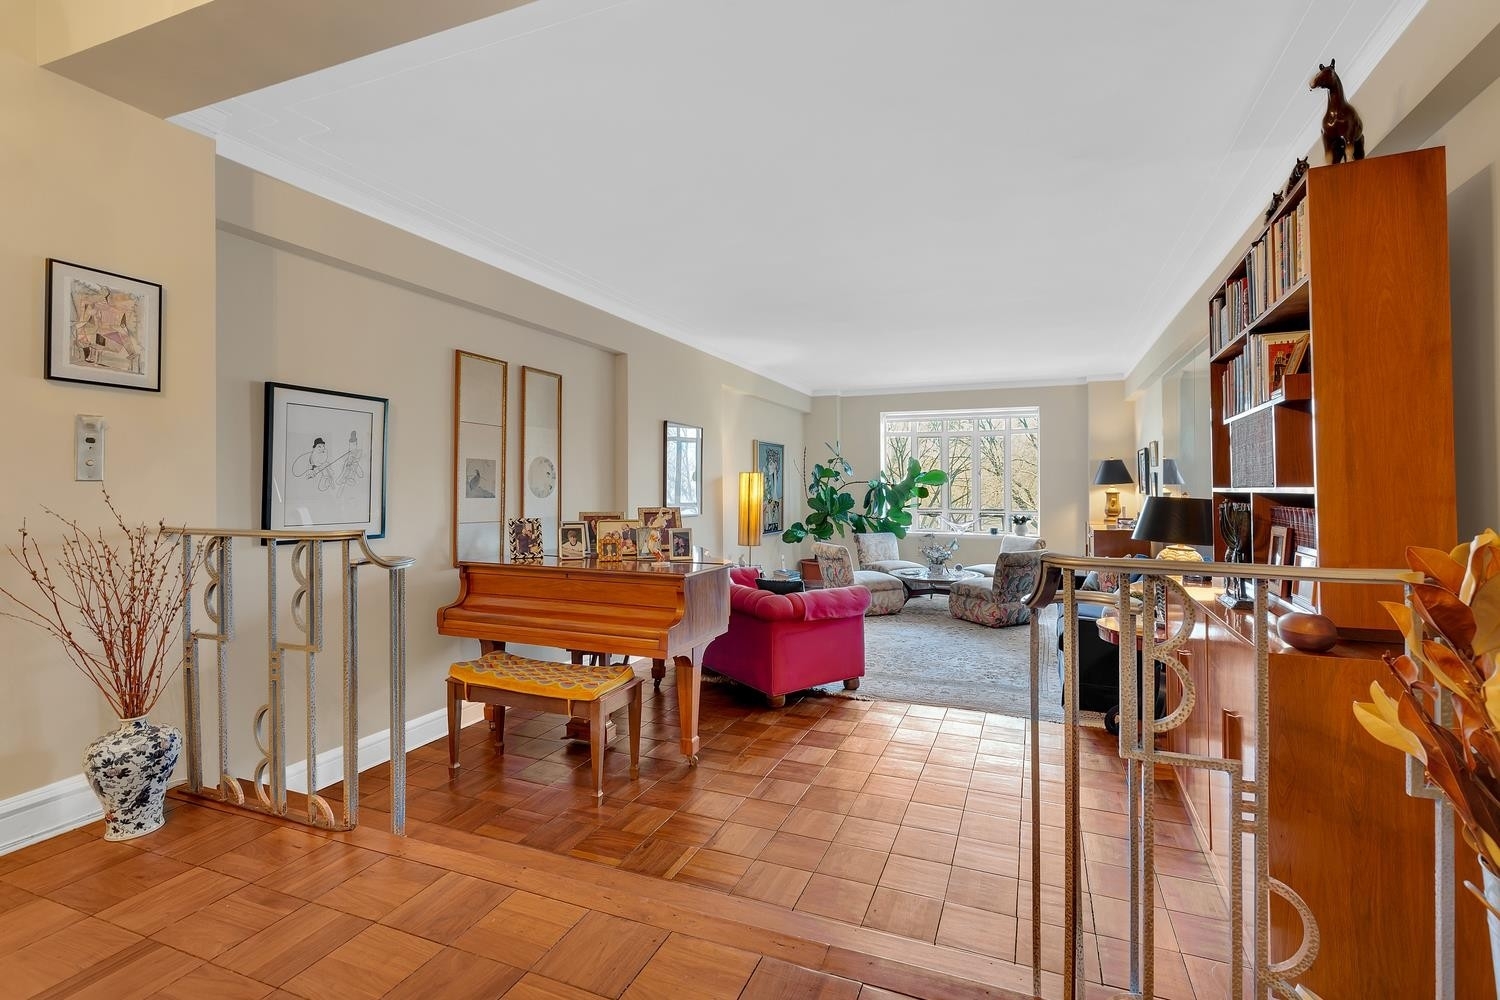 Condominium for Sale at Century, 25 CENTRAL PARK W, 5N Lincoln Square, New York, NY 10023